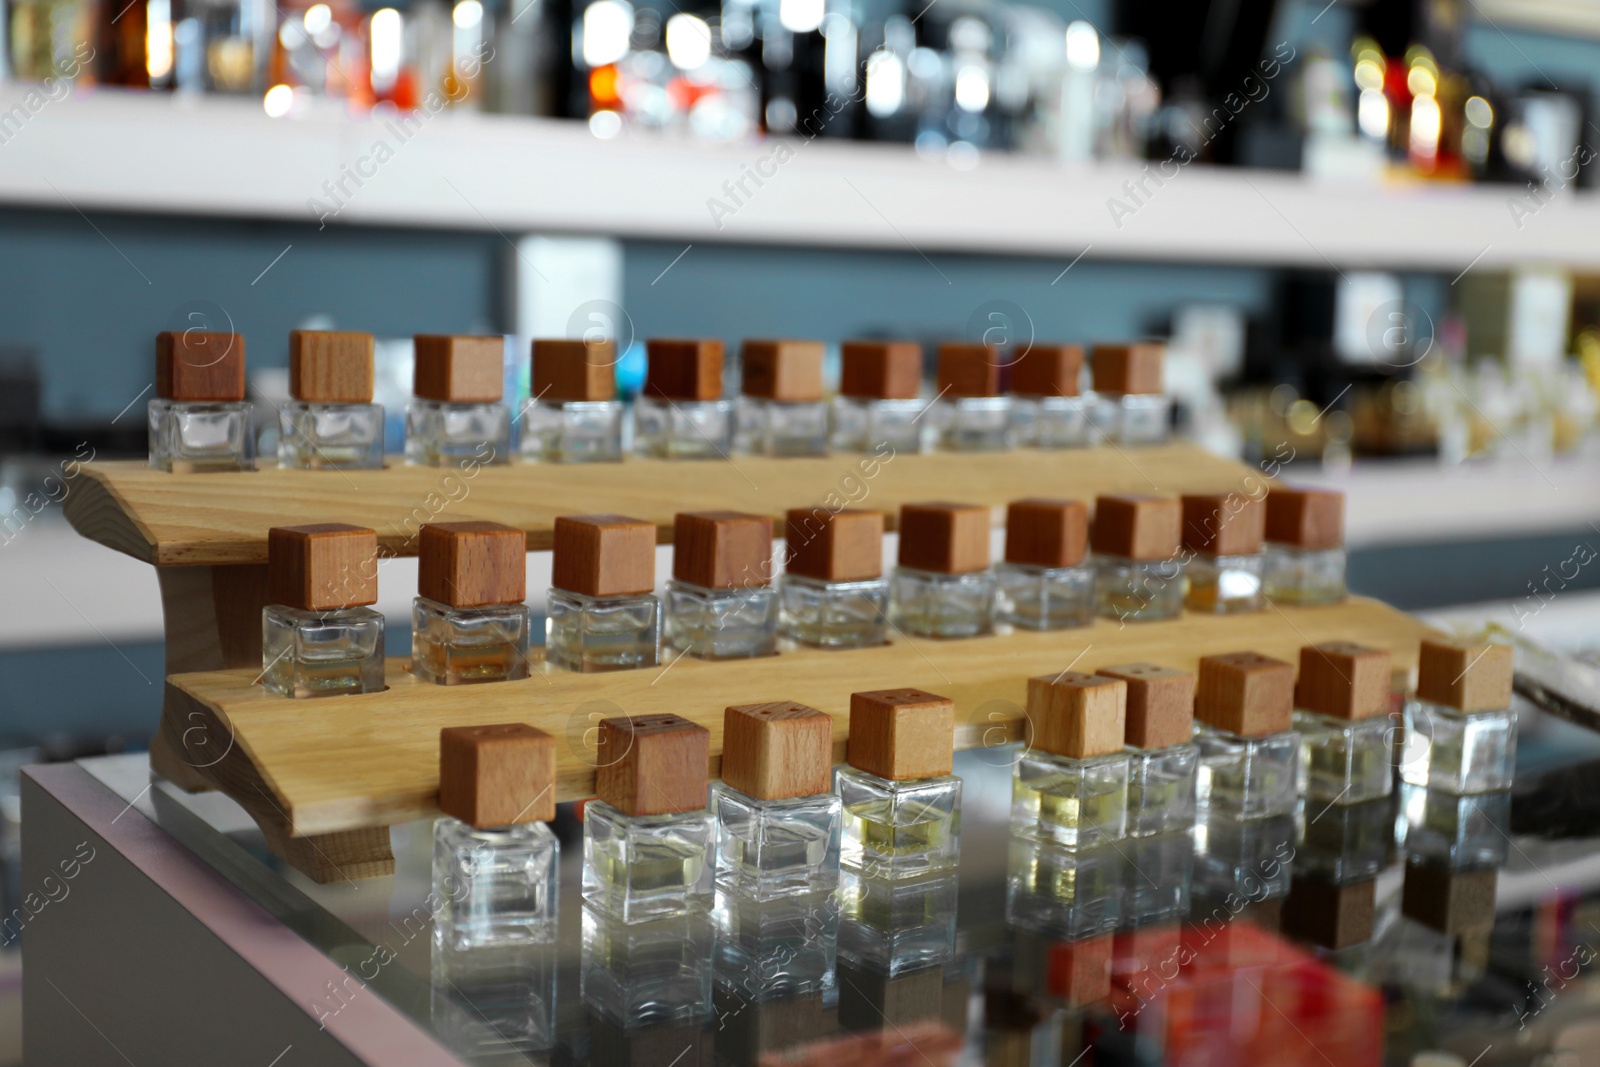 Image of Perfume bottles on glass counter in shop